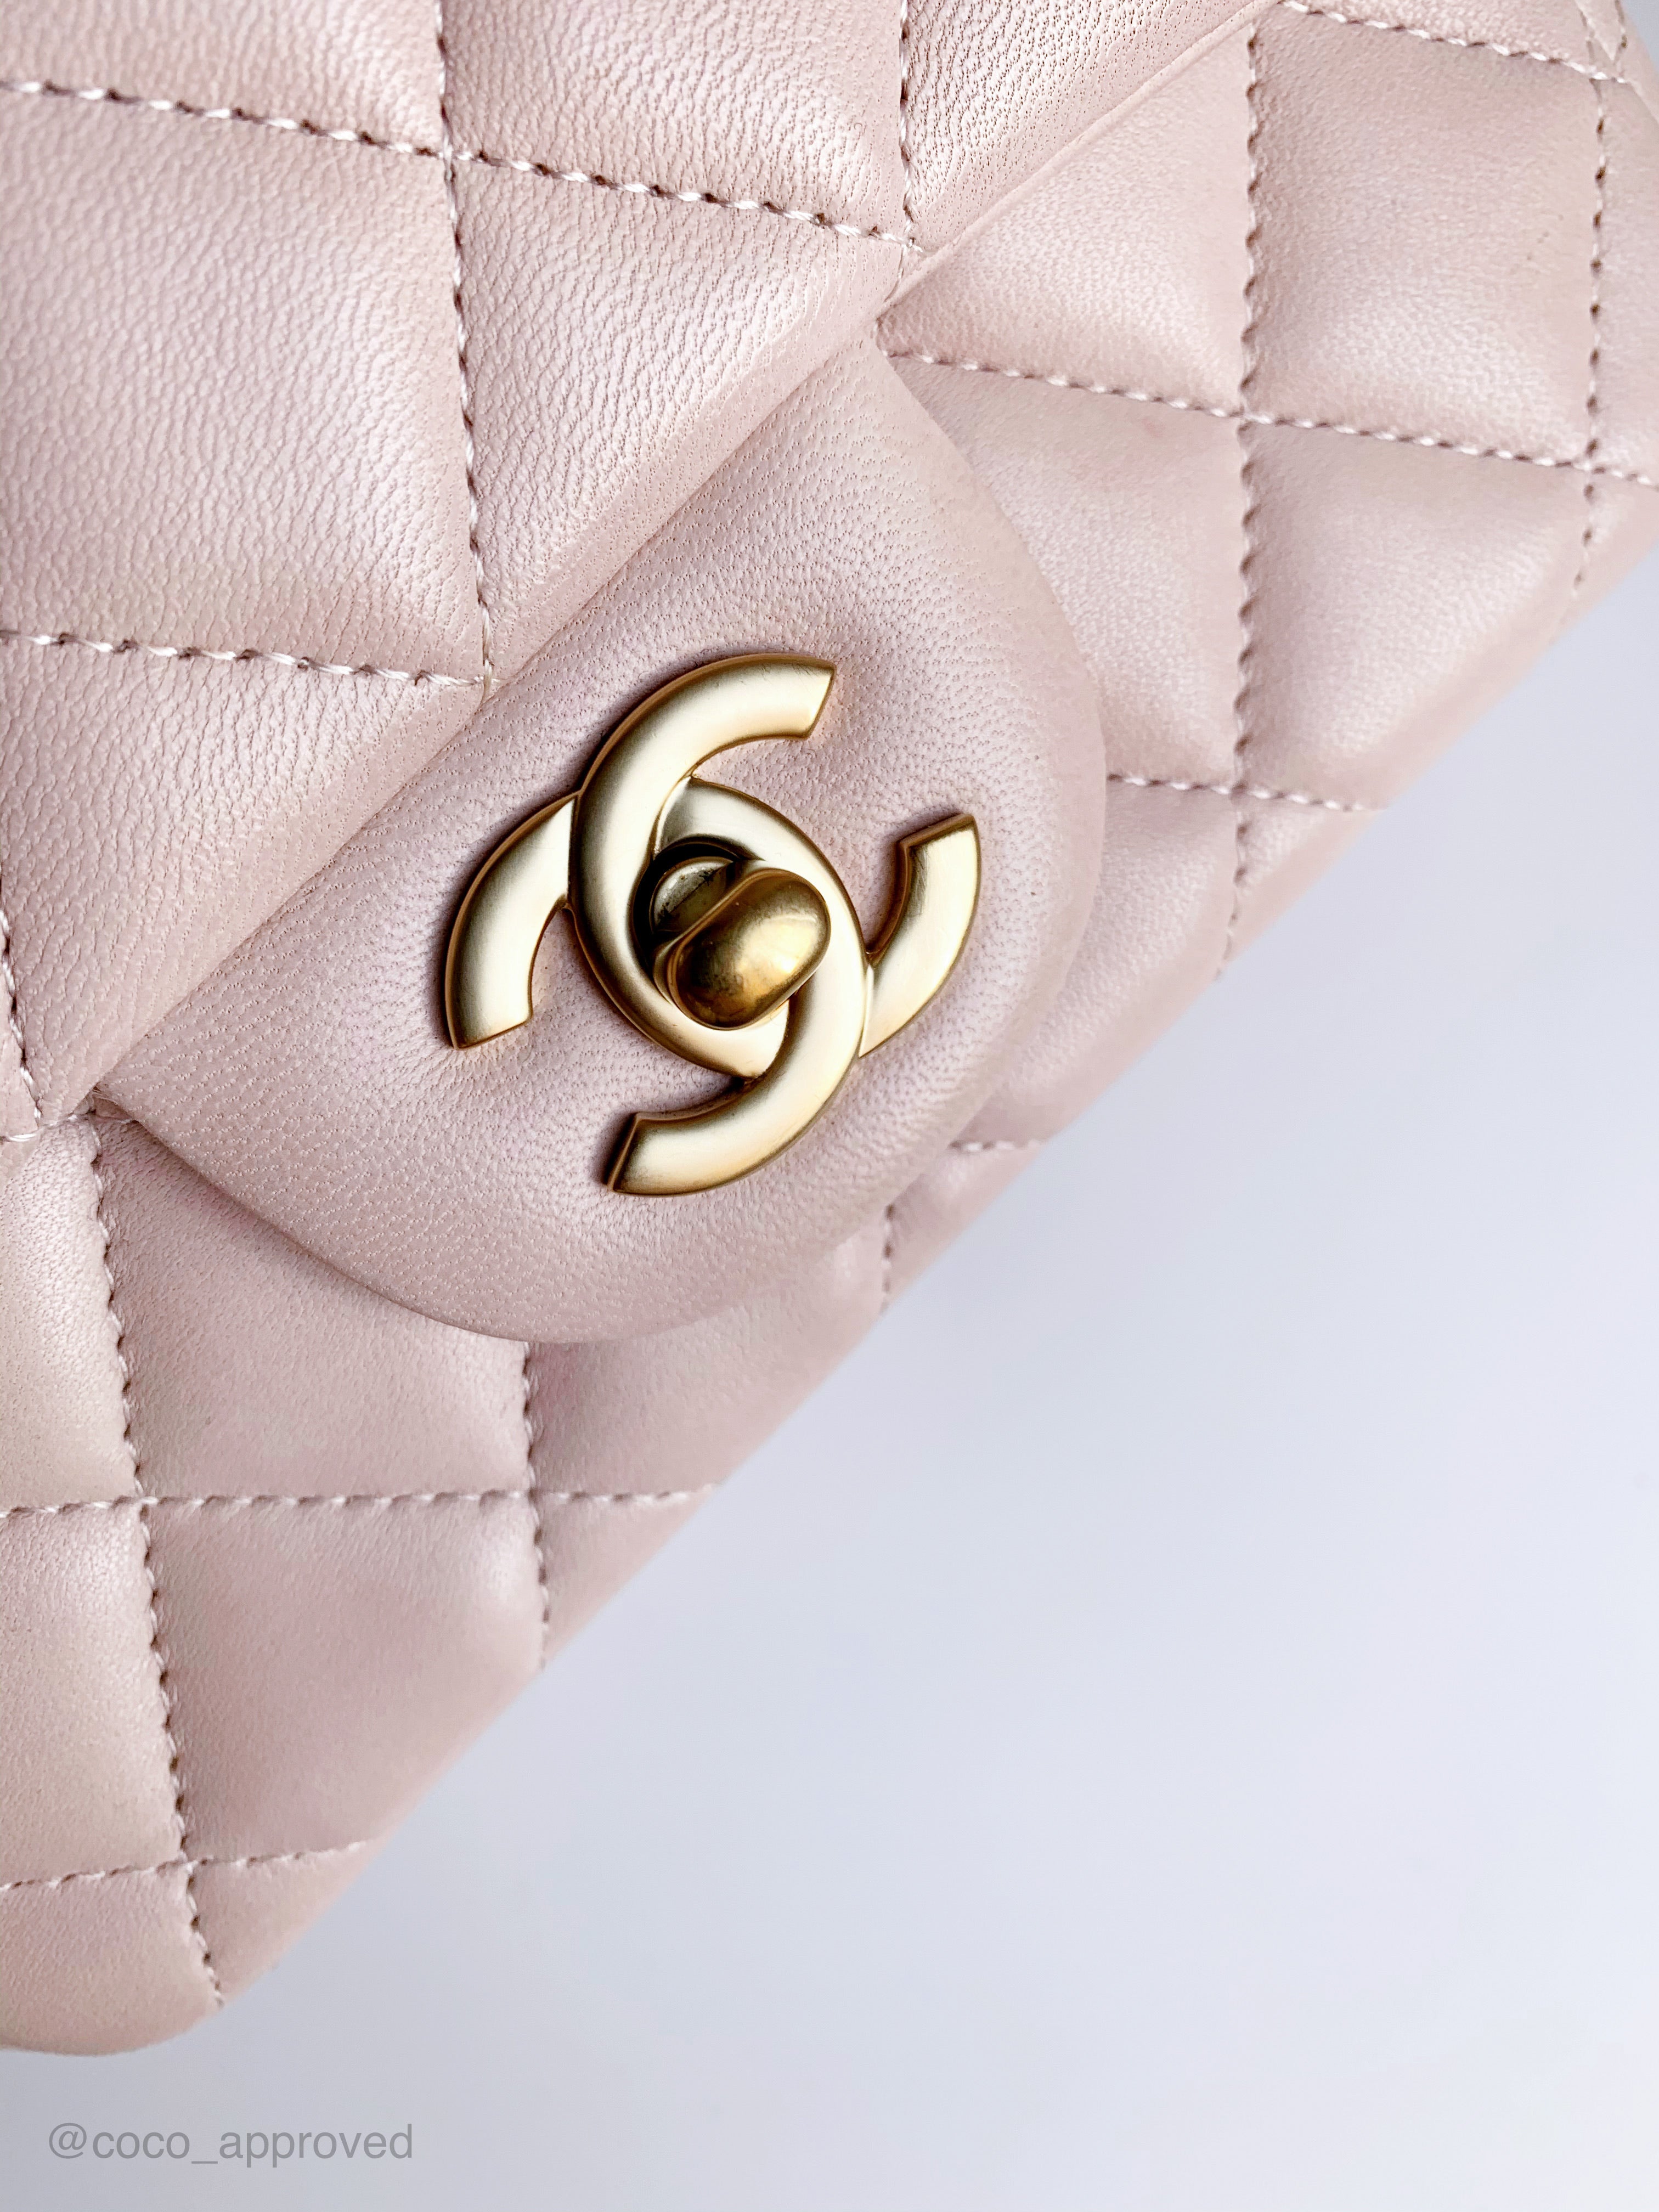 Chanel Light Pink Quilted Lambskin Mini Flap Bag Gold Hardware, 2023 (Like New)